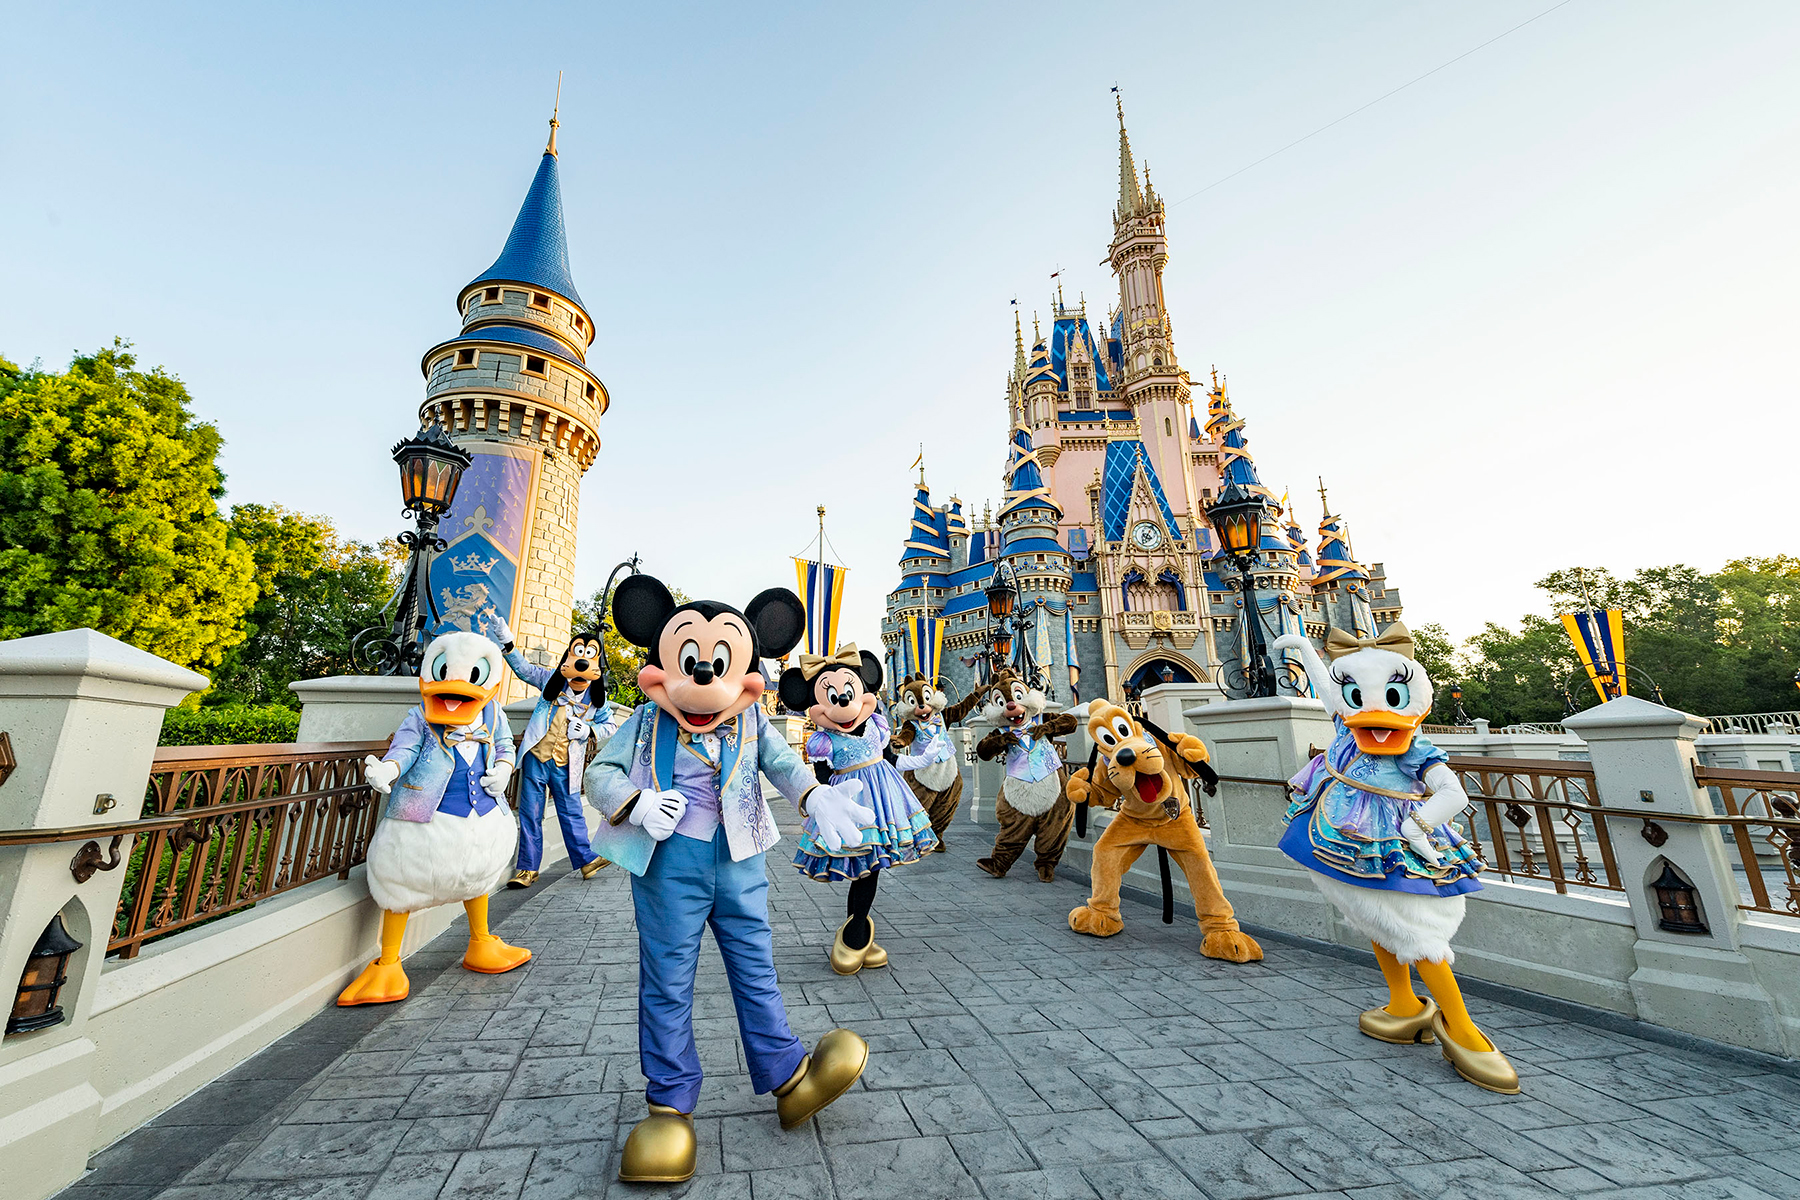 The World's Most Magical Celebration' Kicks Off at Disney World This Week. Travel + Leisure